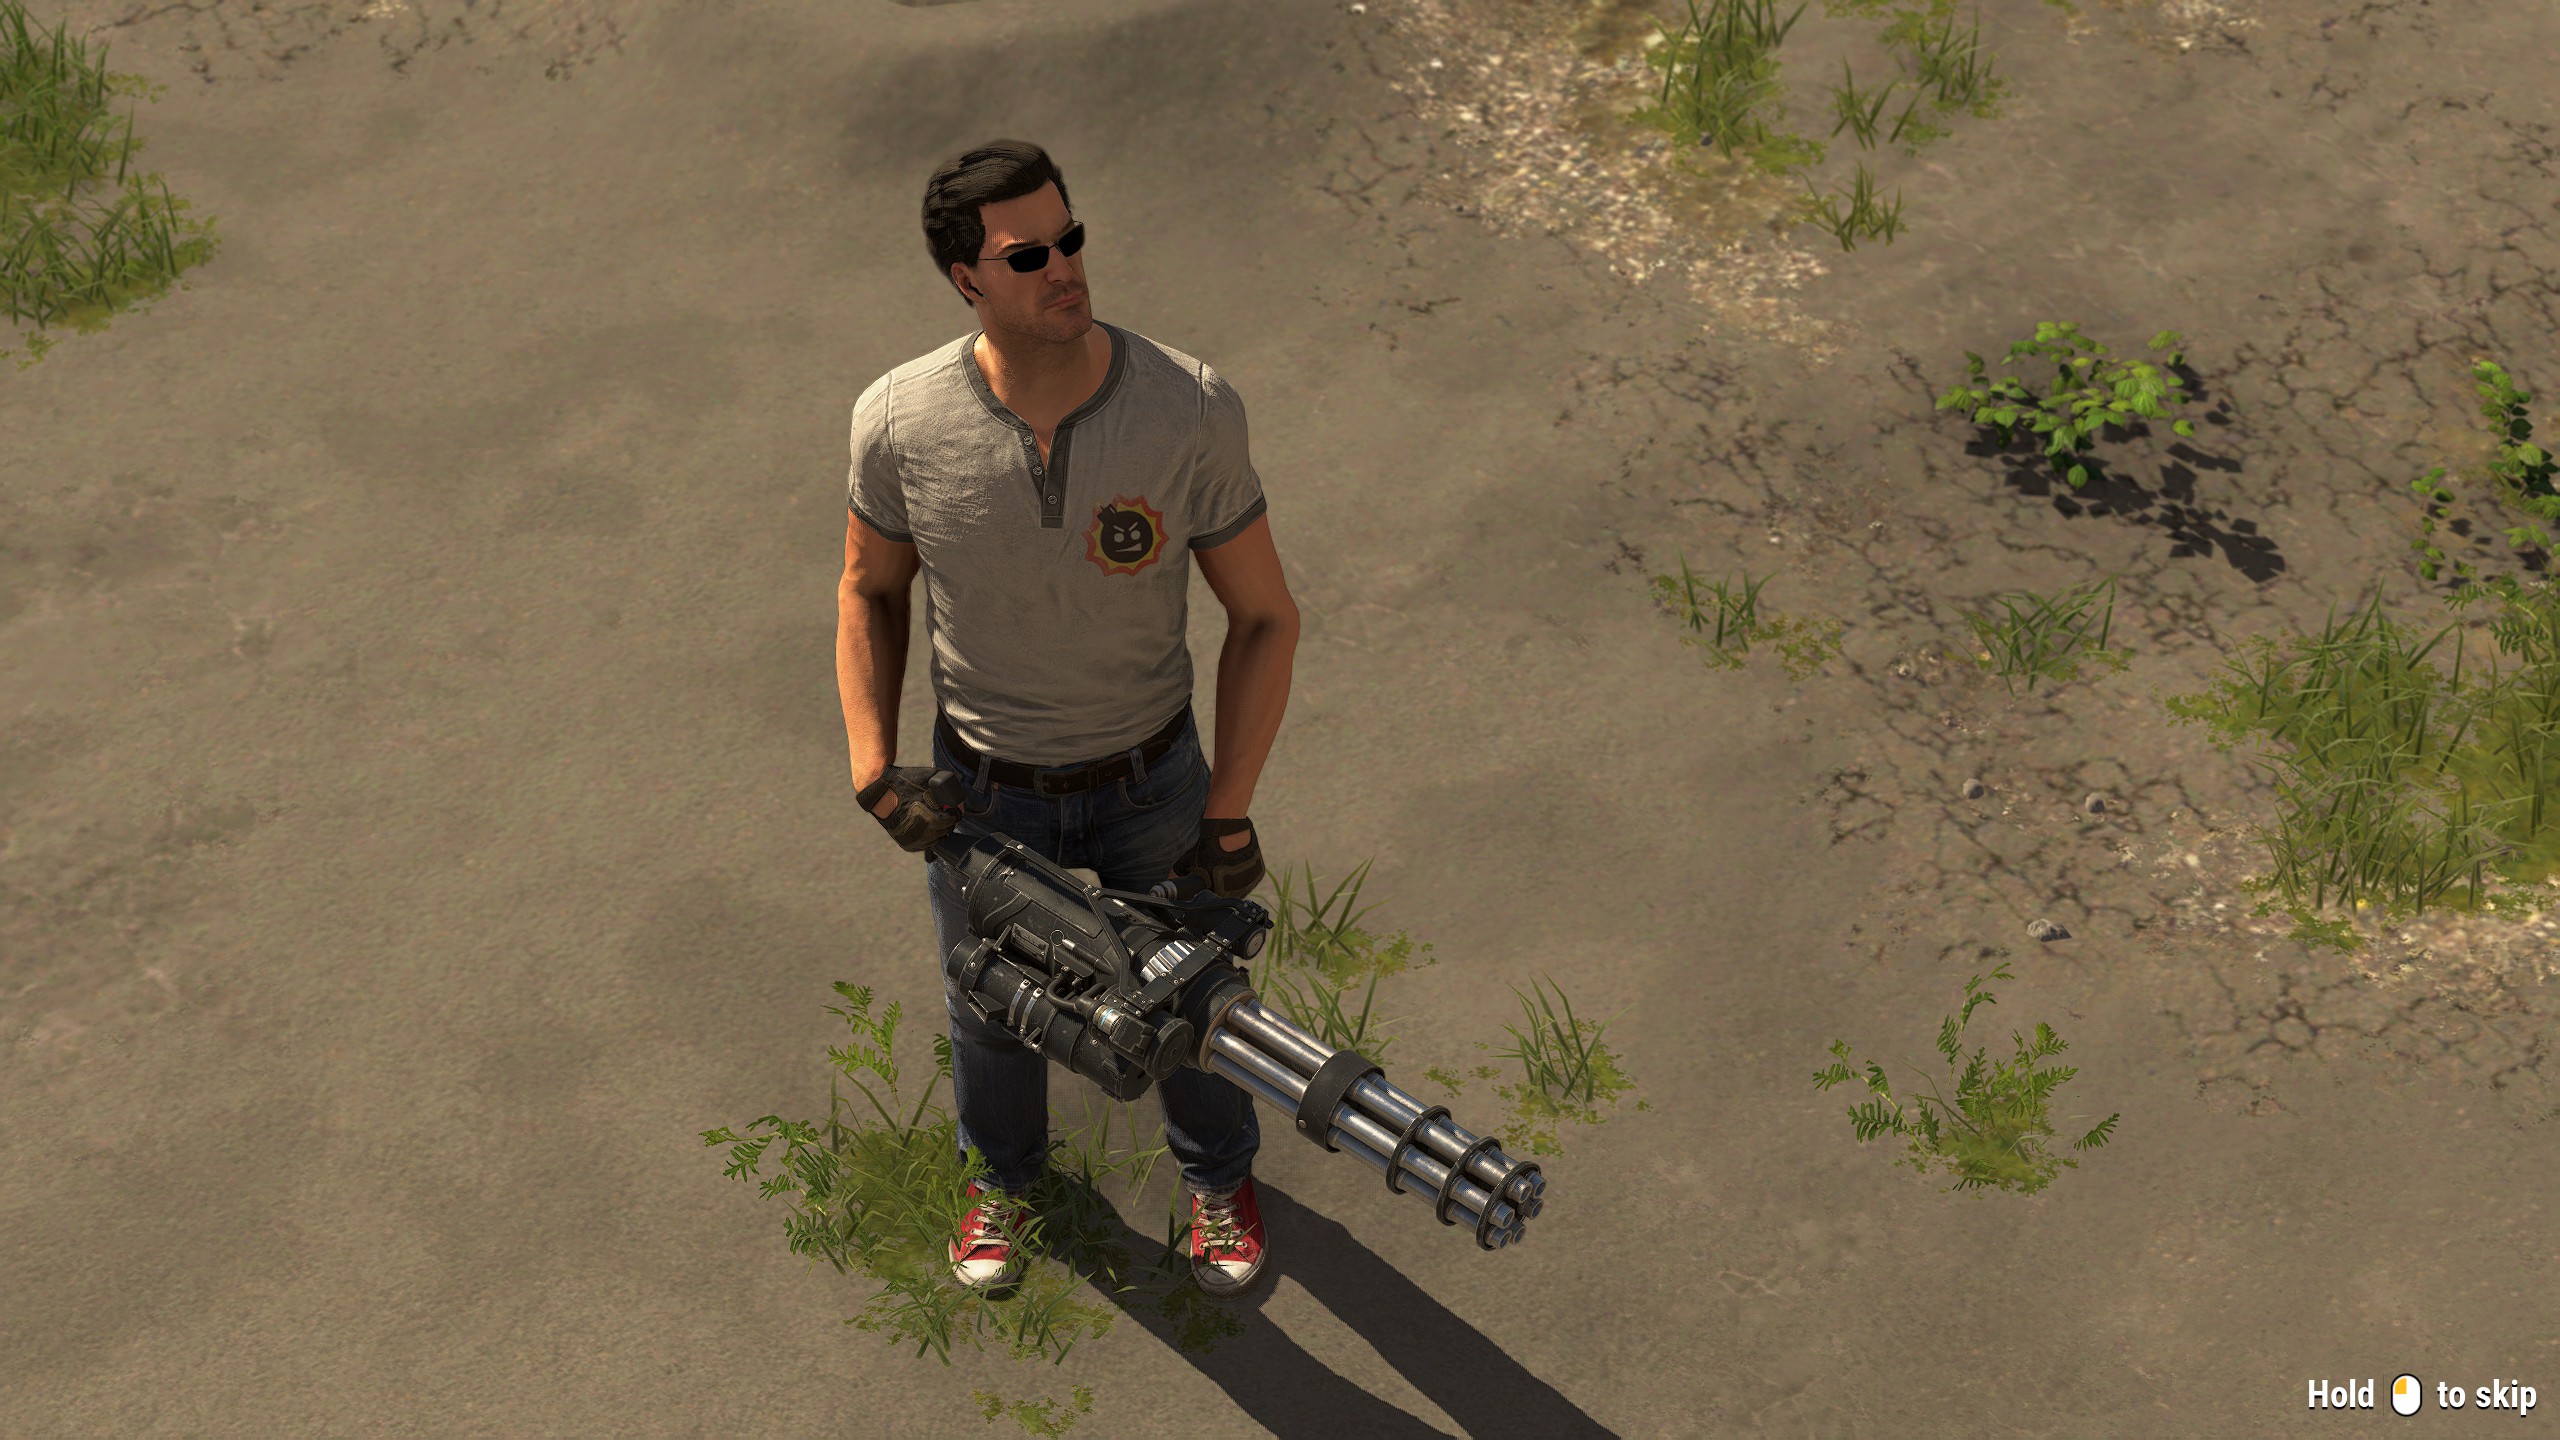 A new Serious Sam game is coming out this month, and probably yelling a lot